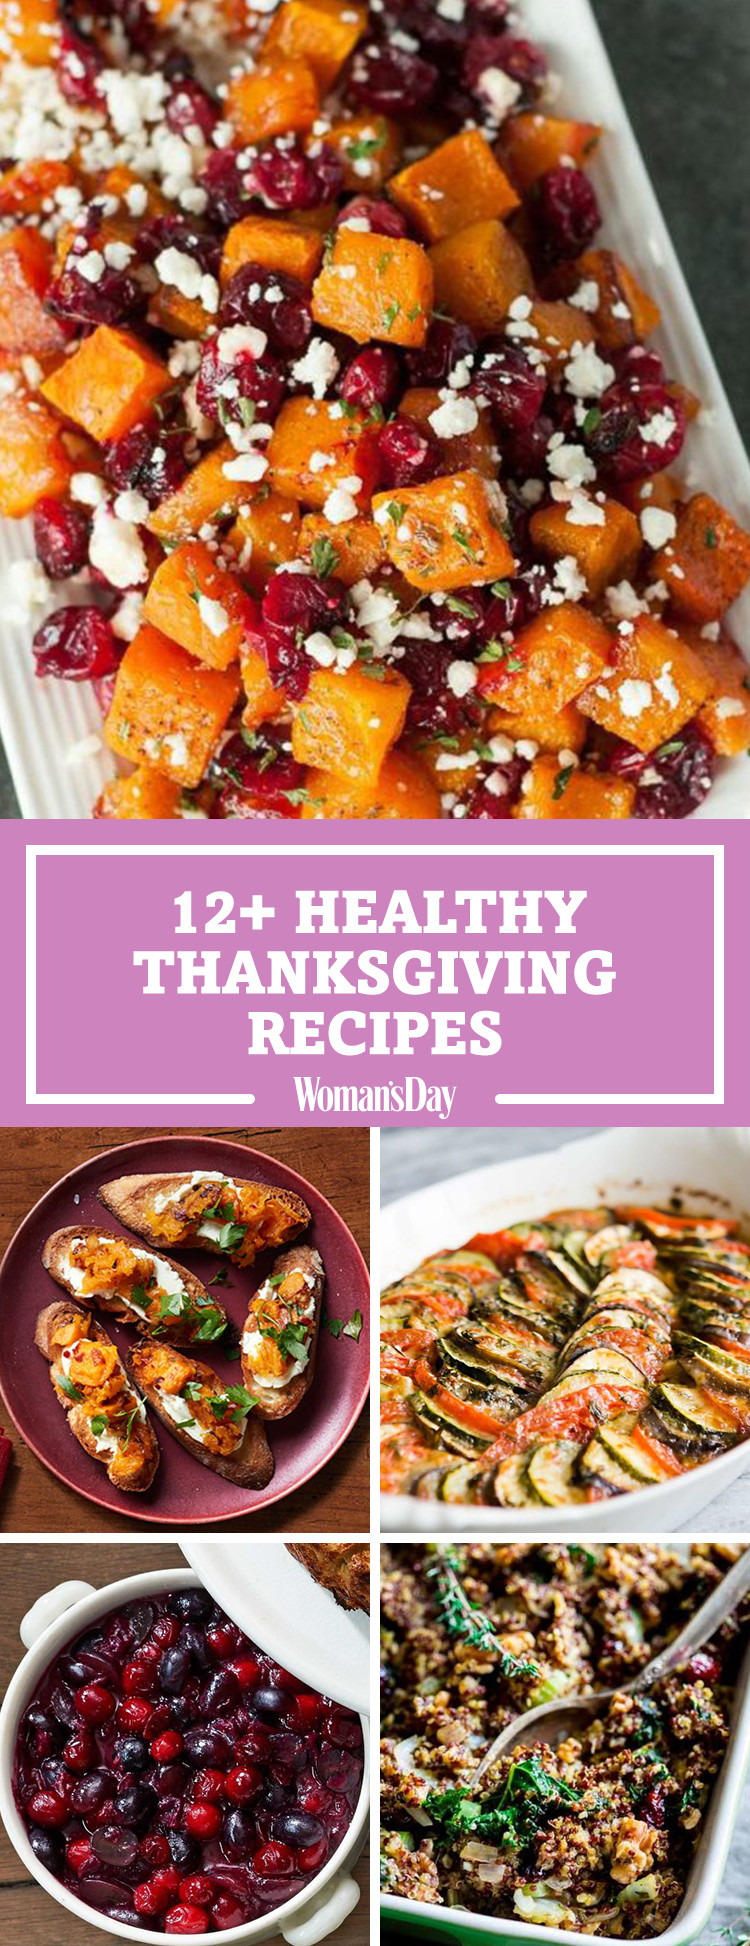 Sides For Thanksgiving Dinner
 16 Healthy Thanksgiving Dinner Recipes Healthier Sides